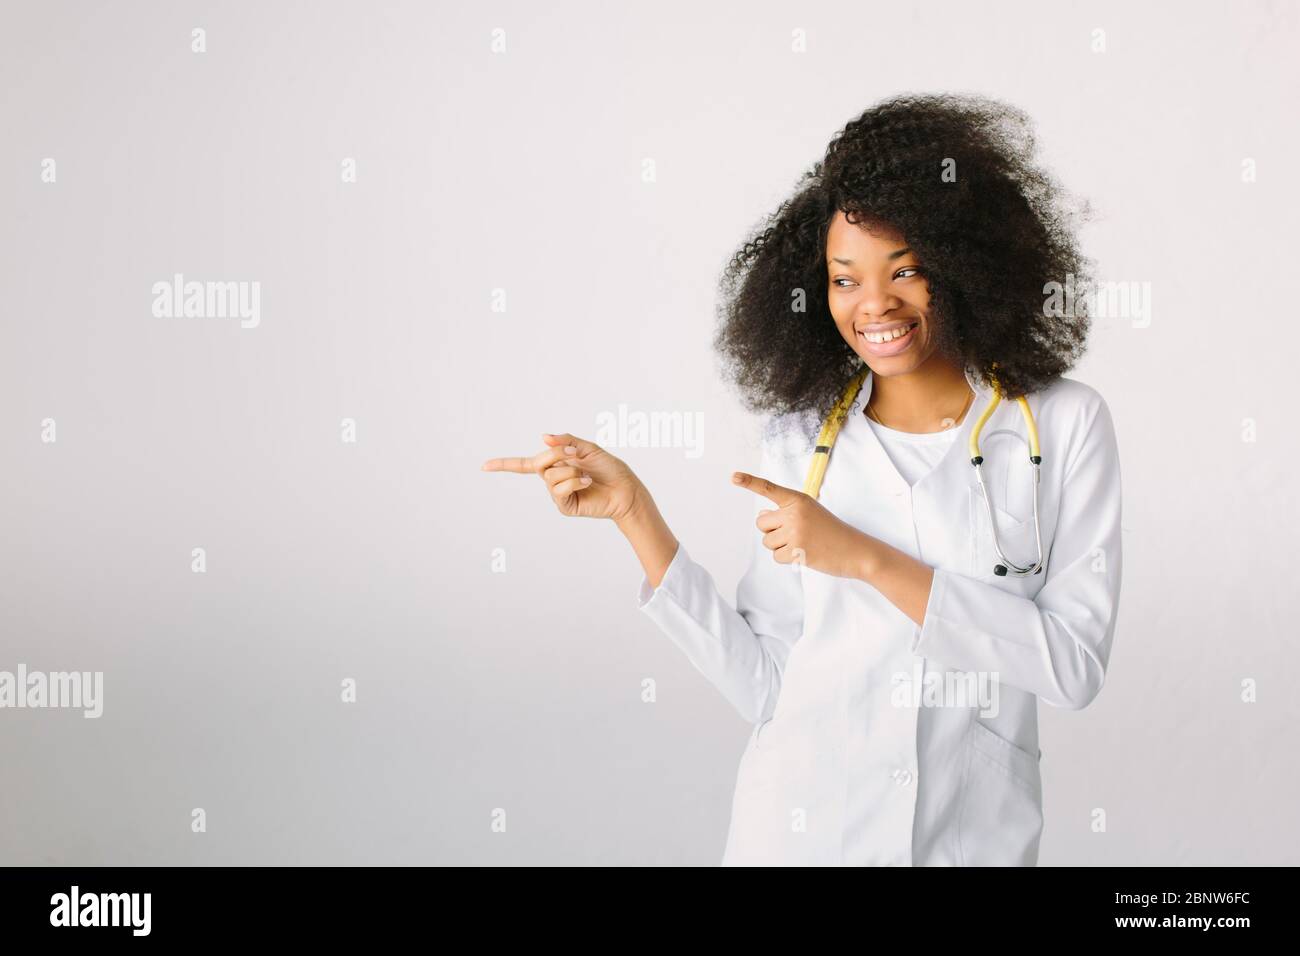 Beautiful African American doctor or nurse smiling isolated over white background, show something important. Stock Photo